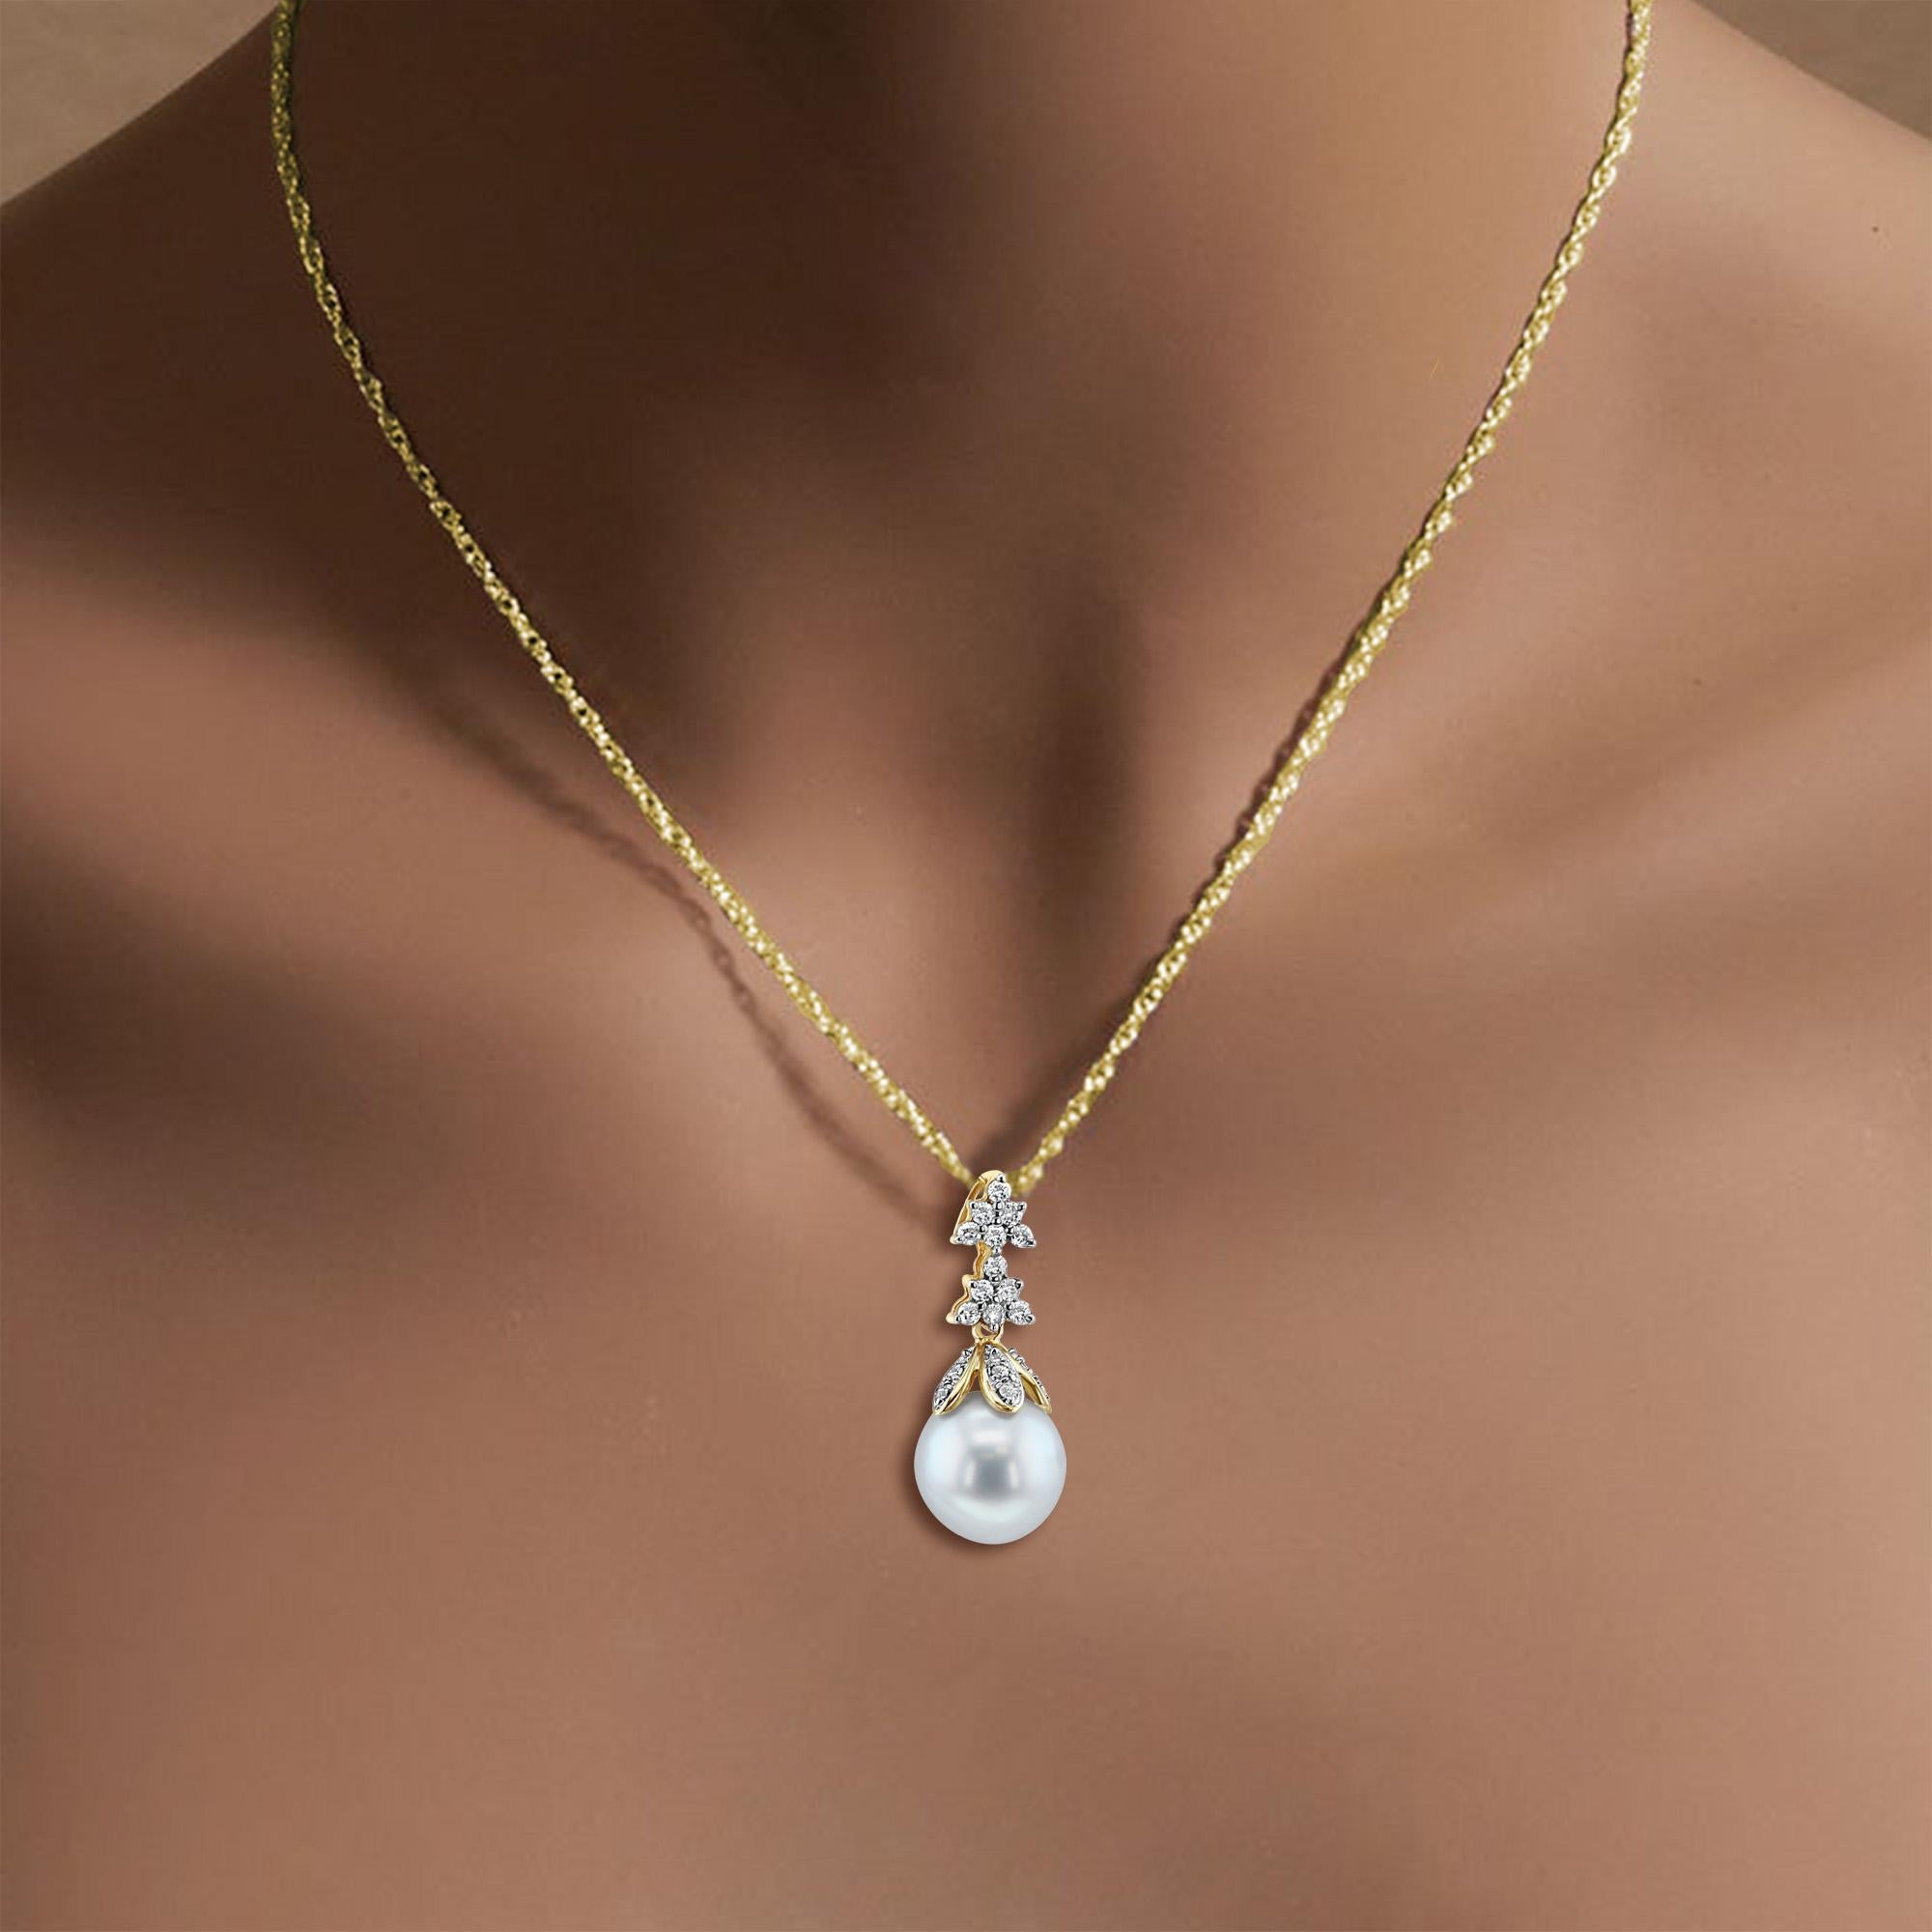 ♥ Product Summary ♥

Main Stone: Freshwater Pearl & Diamonds
Approx. Diamond Carat Weight: .25cttw
Pearl Size: 10mm
Metal: 14k Yellow Gold
Diamond Cut: Round
Length: 25mm